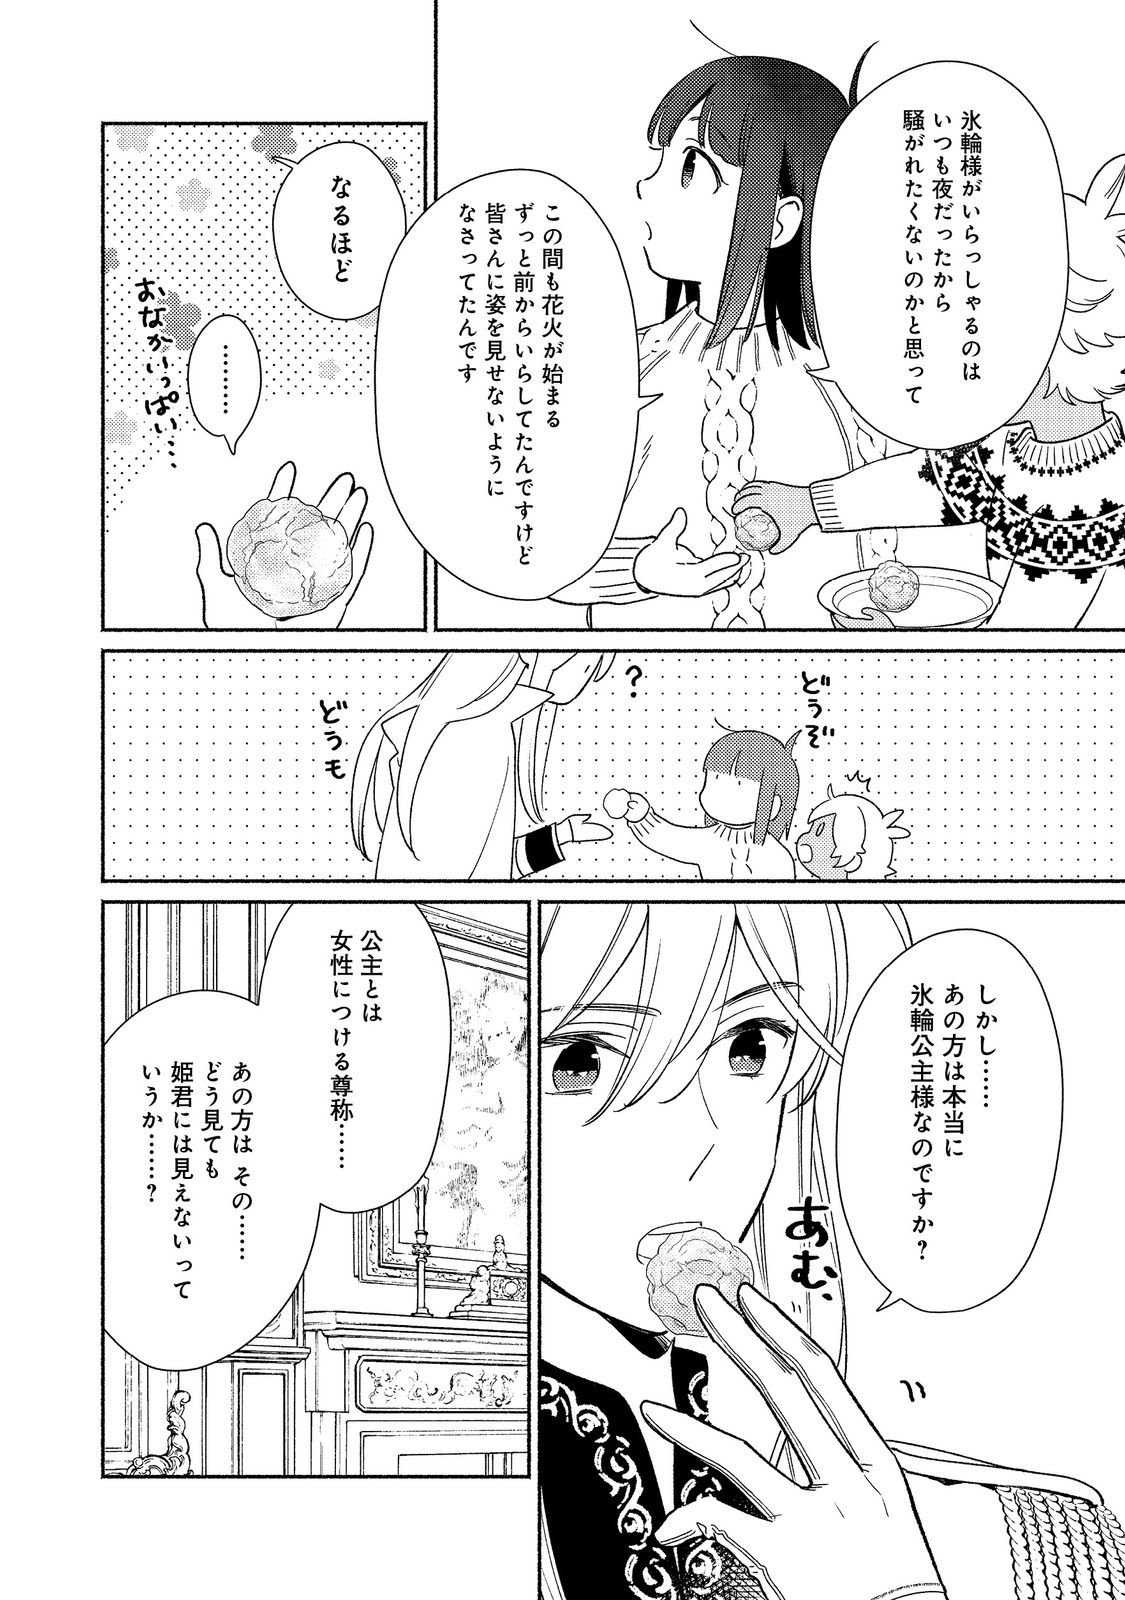 I’m the White Pig Nobleman 第26.2話 - Page 9